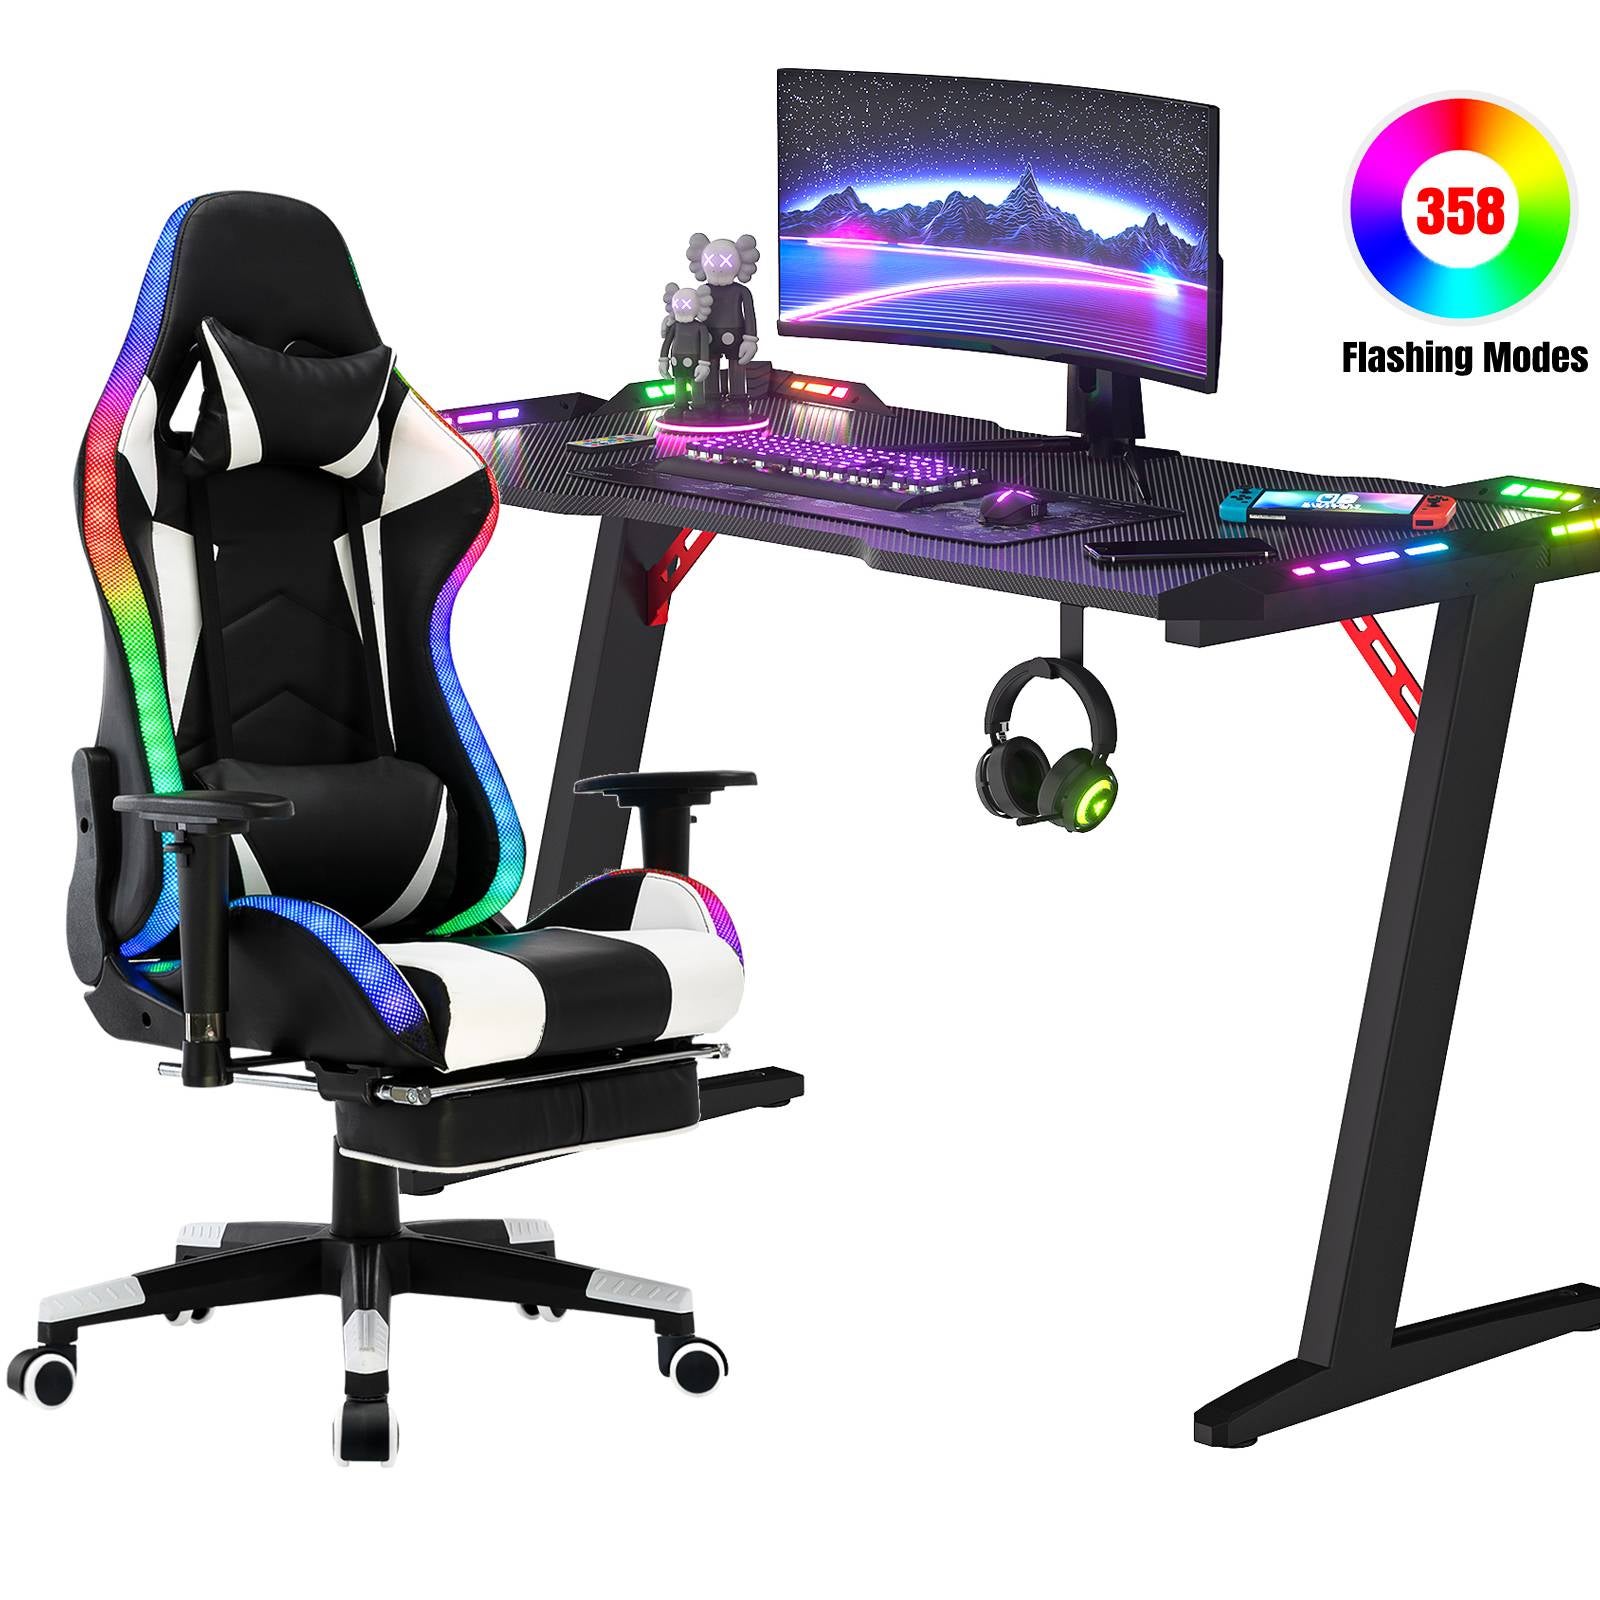 Gaming Chair Desk Setup Office Table Racing Seat(Black Desk,Red/White&Black Chair)